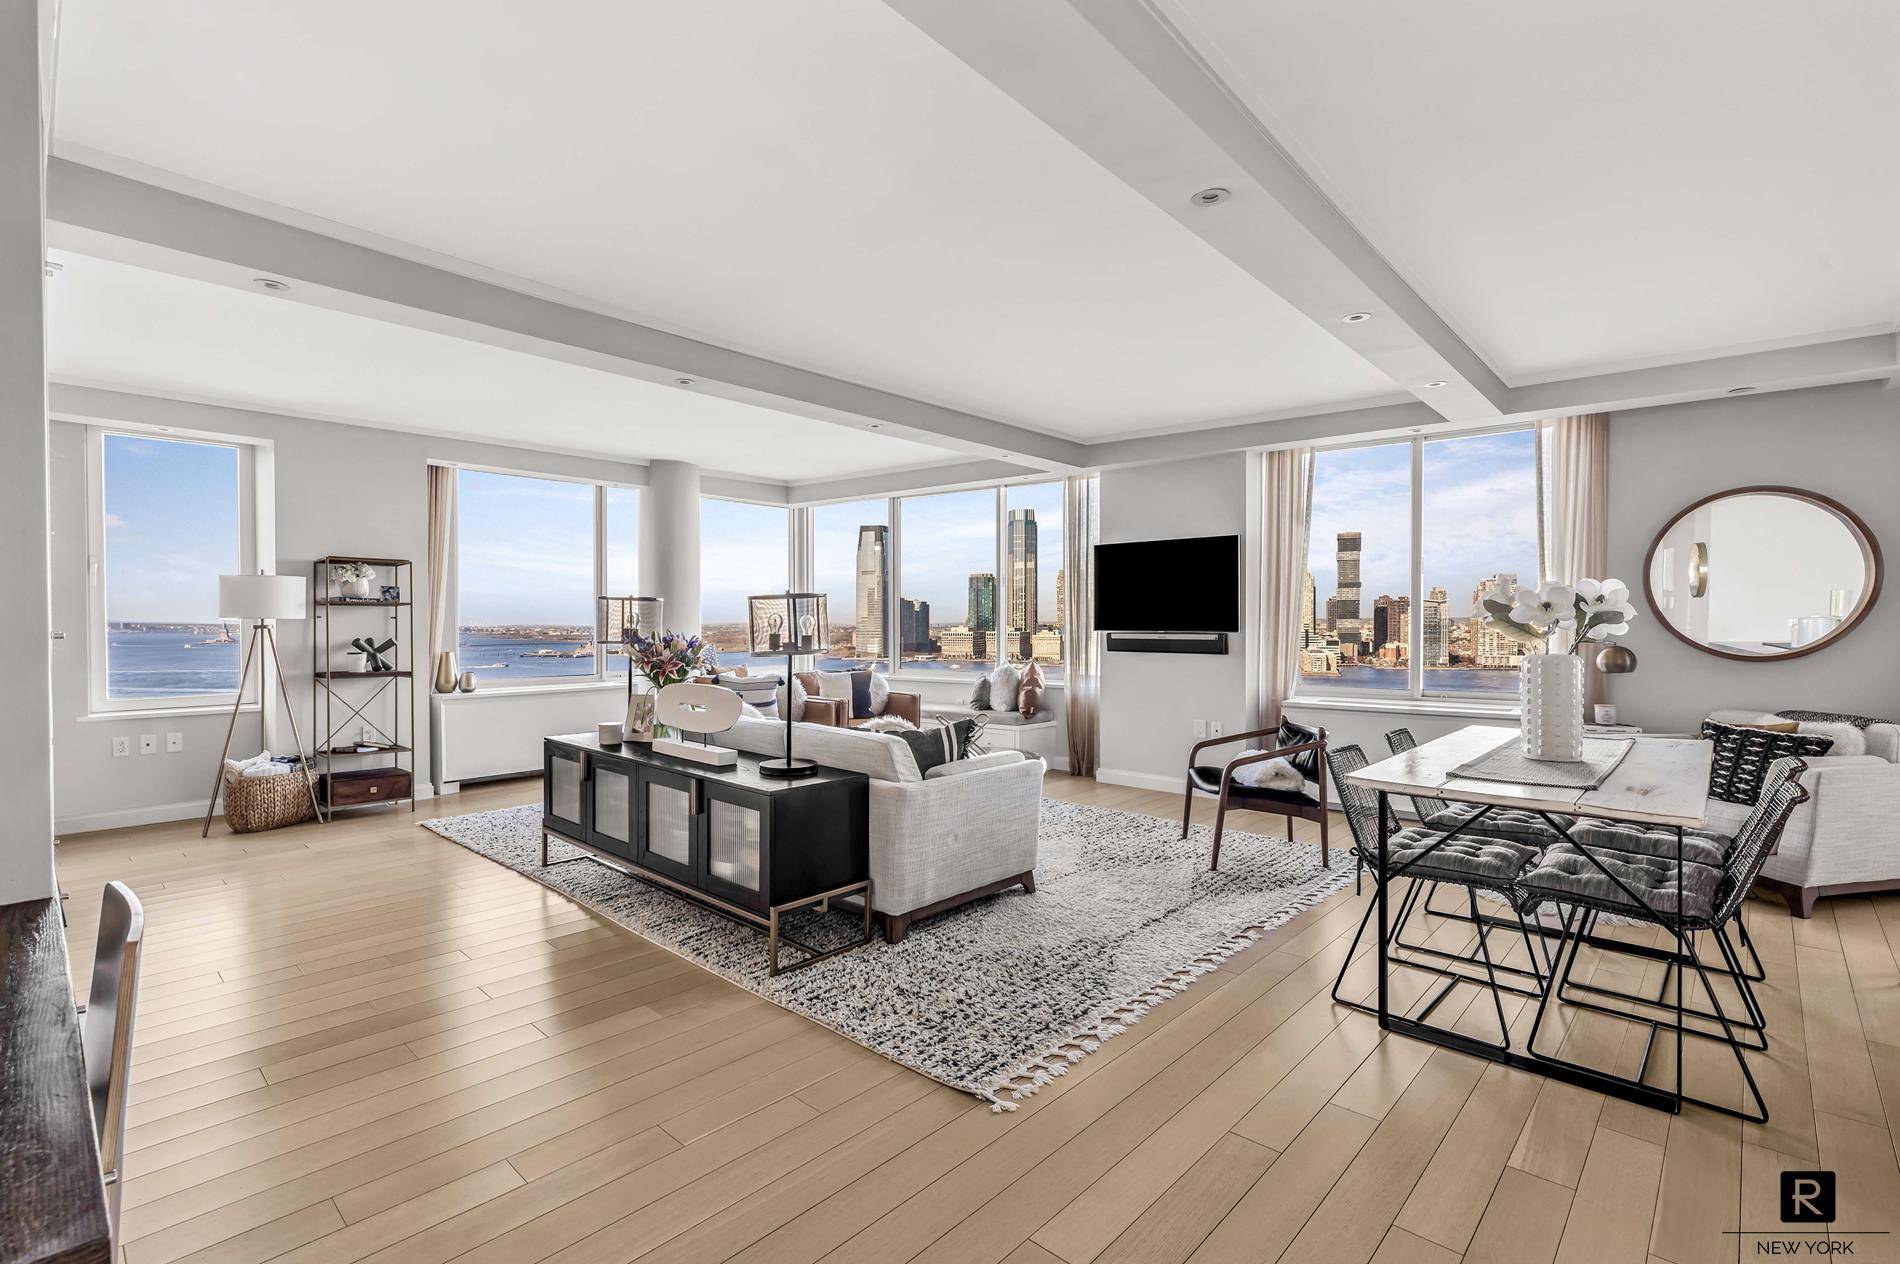 NOT TO BE MISSED Panoramic Hudson River views and spacious layout from this stunning high floor 3 bedroom 3 bath residence.